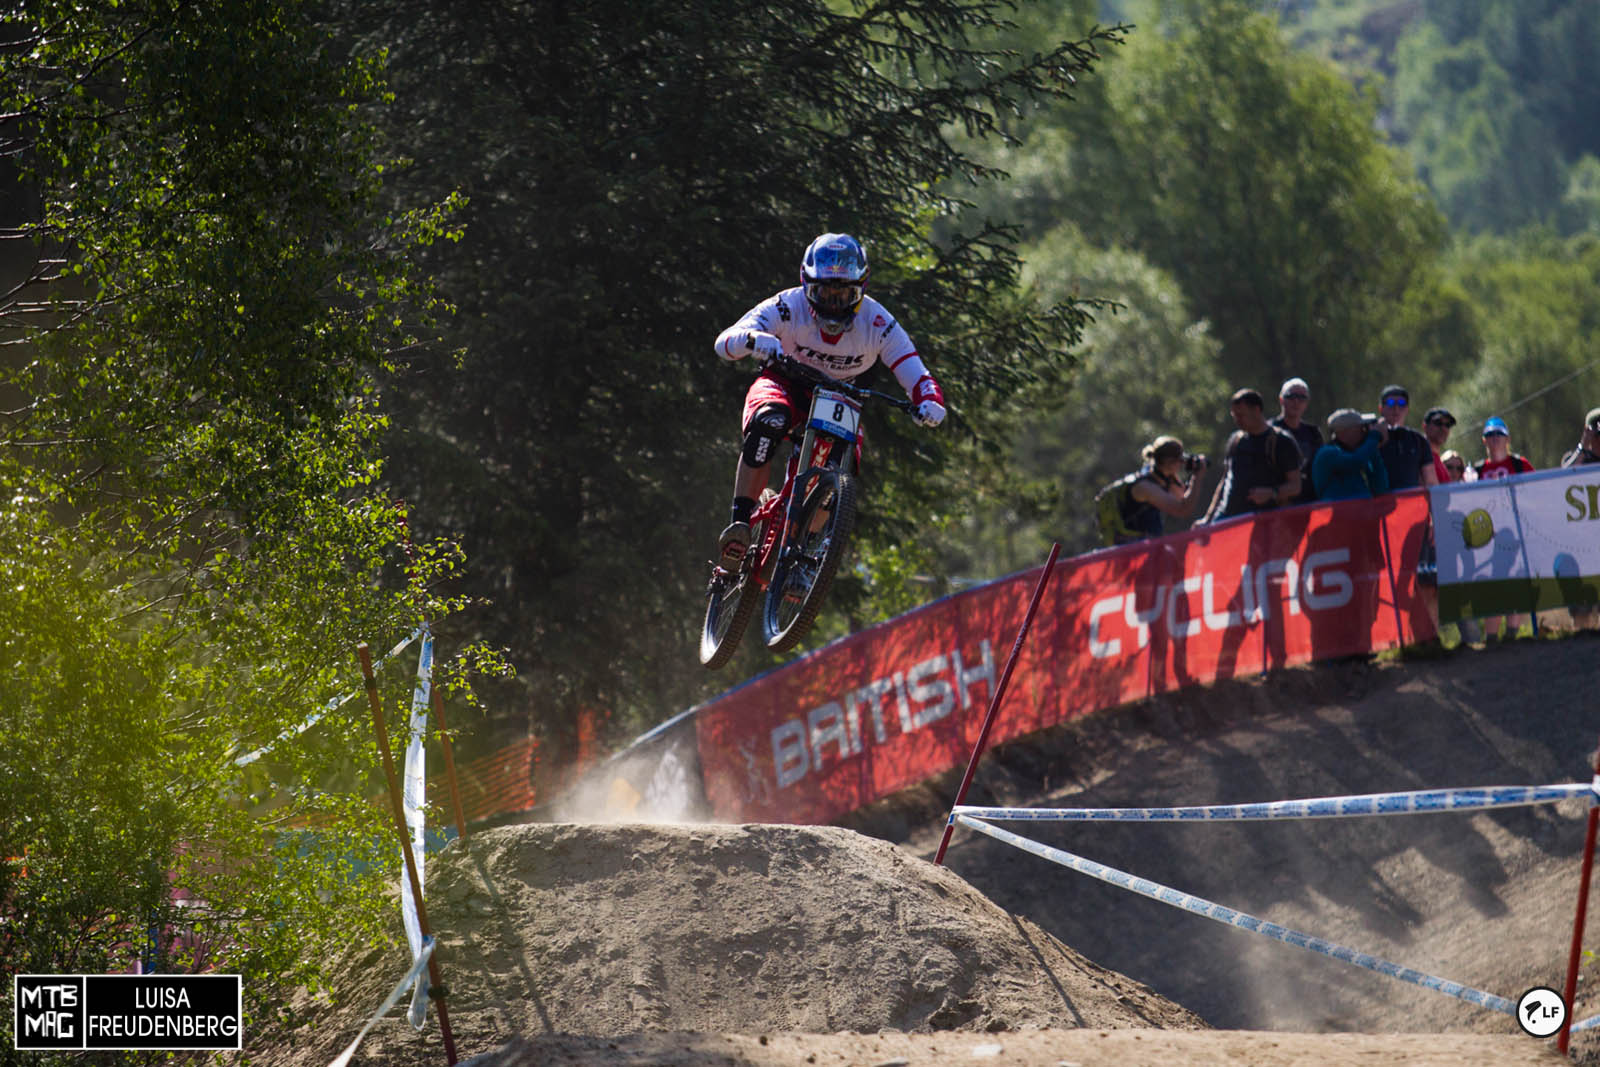 Bad day at the office for Gee Atherton.